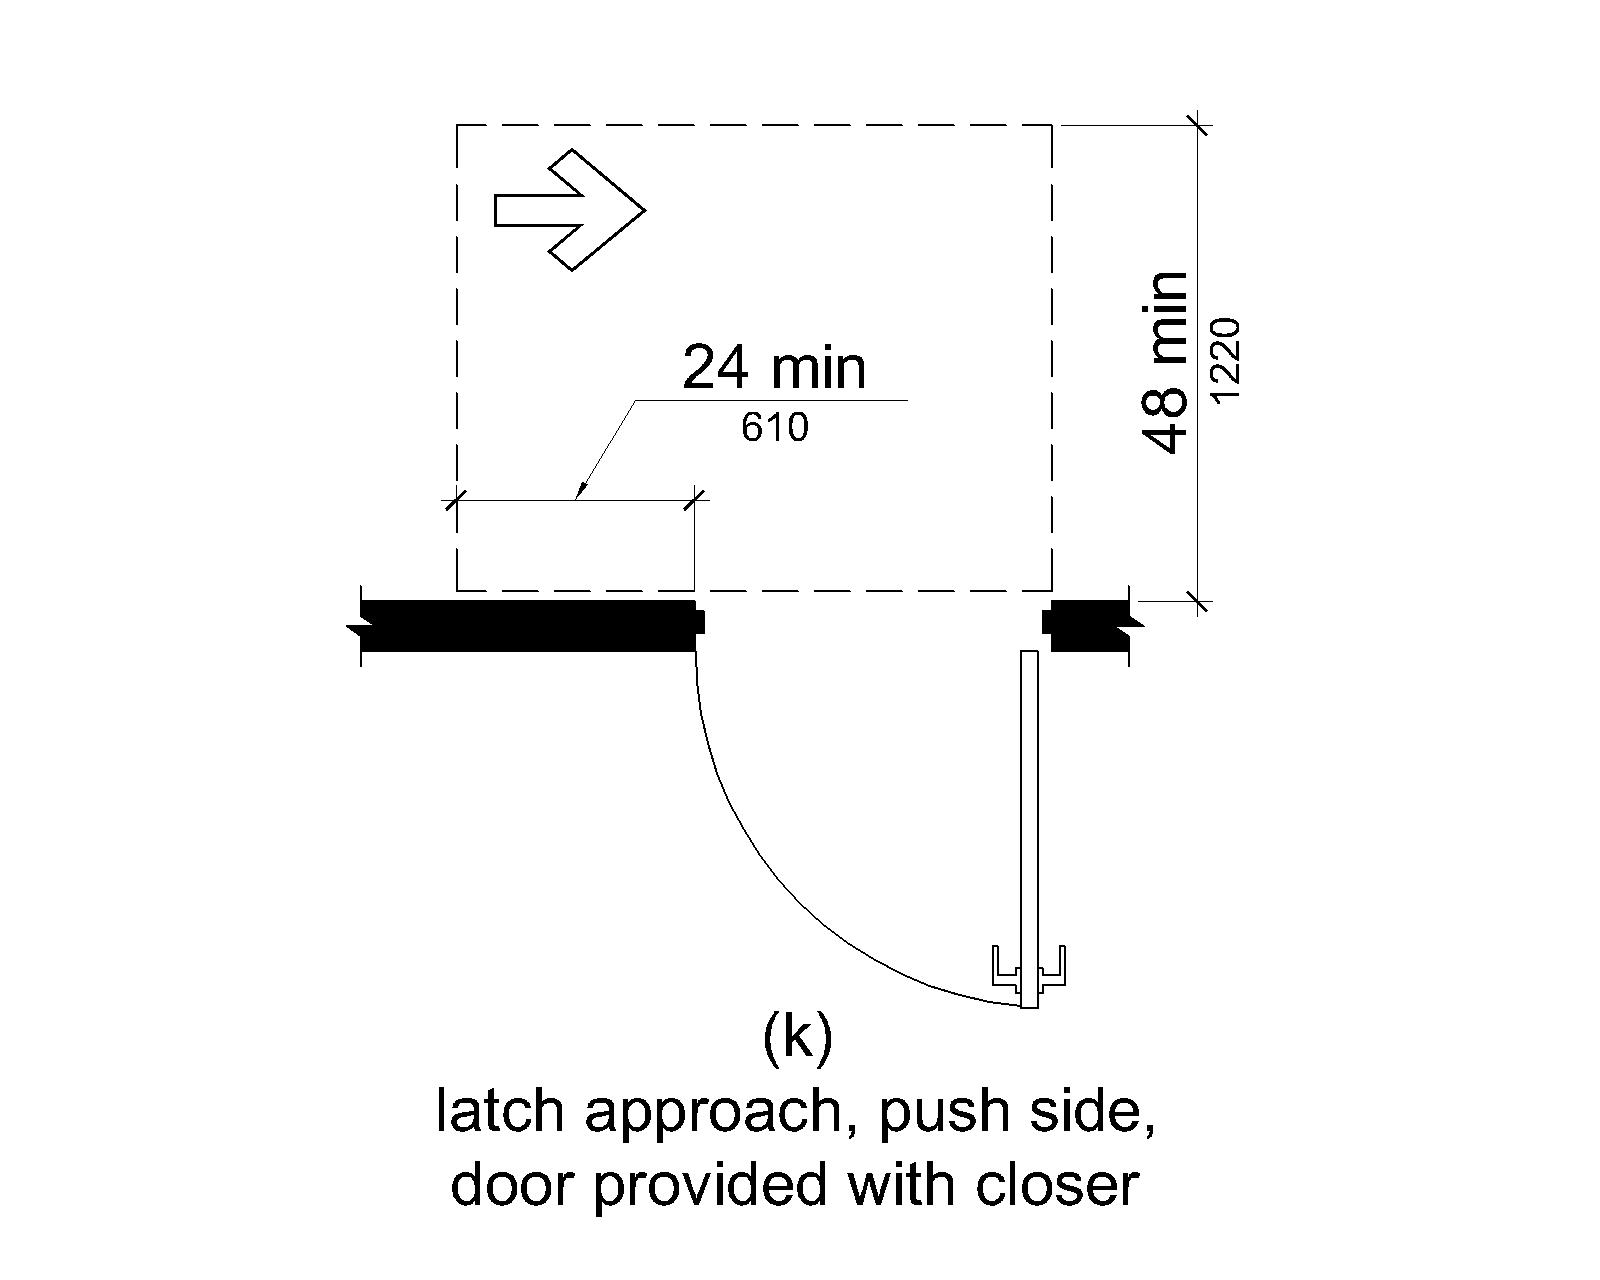 (k) On the push side, maneuvering space extends 24 inches (560 mm) from the latch side of the doorway and 48 inches (1220 mm) minimum perpendicular to the doorway if the door has both a closer and a latch.